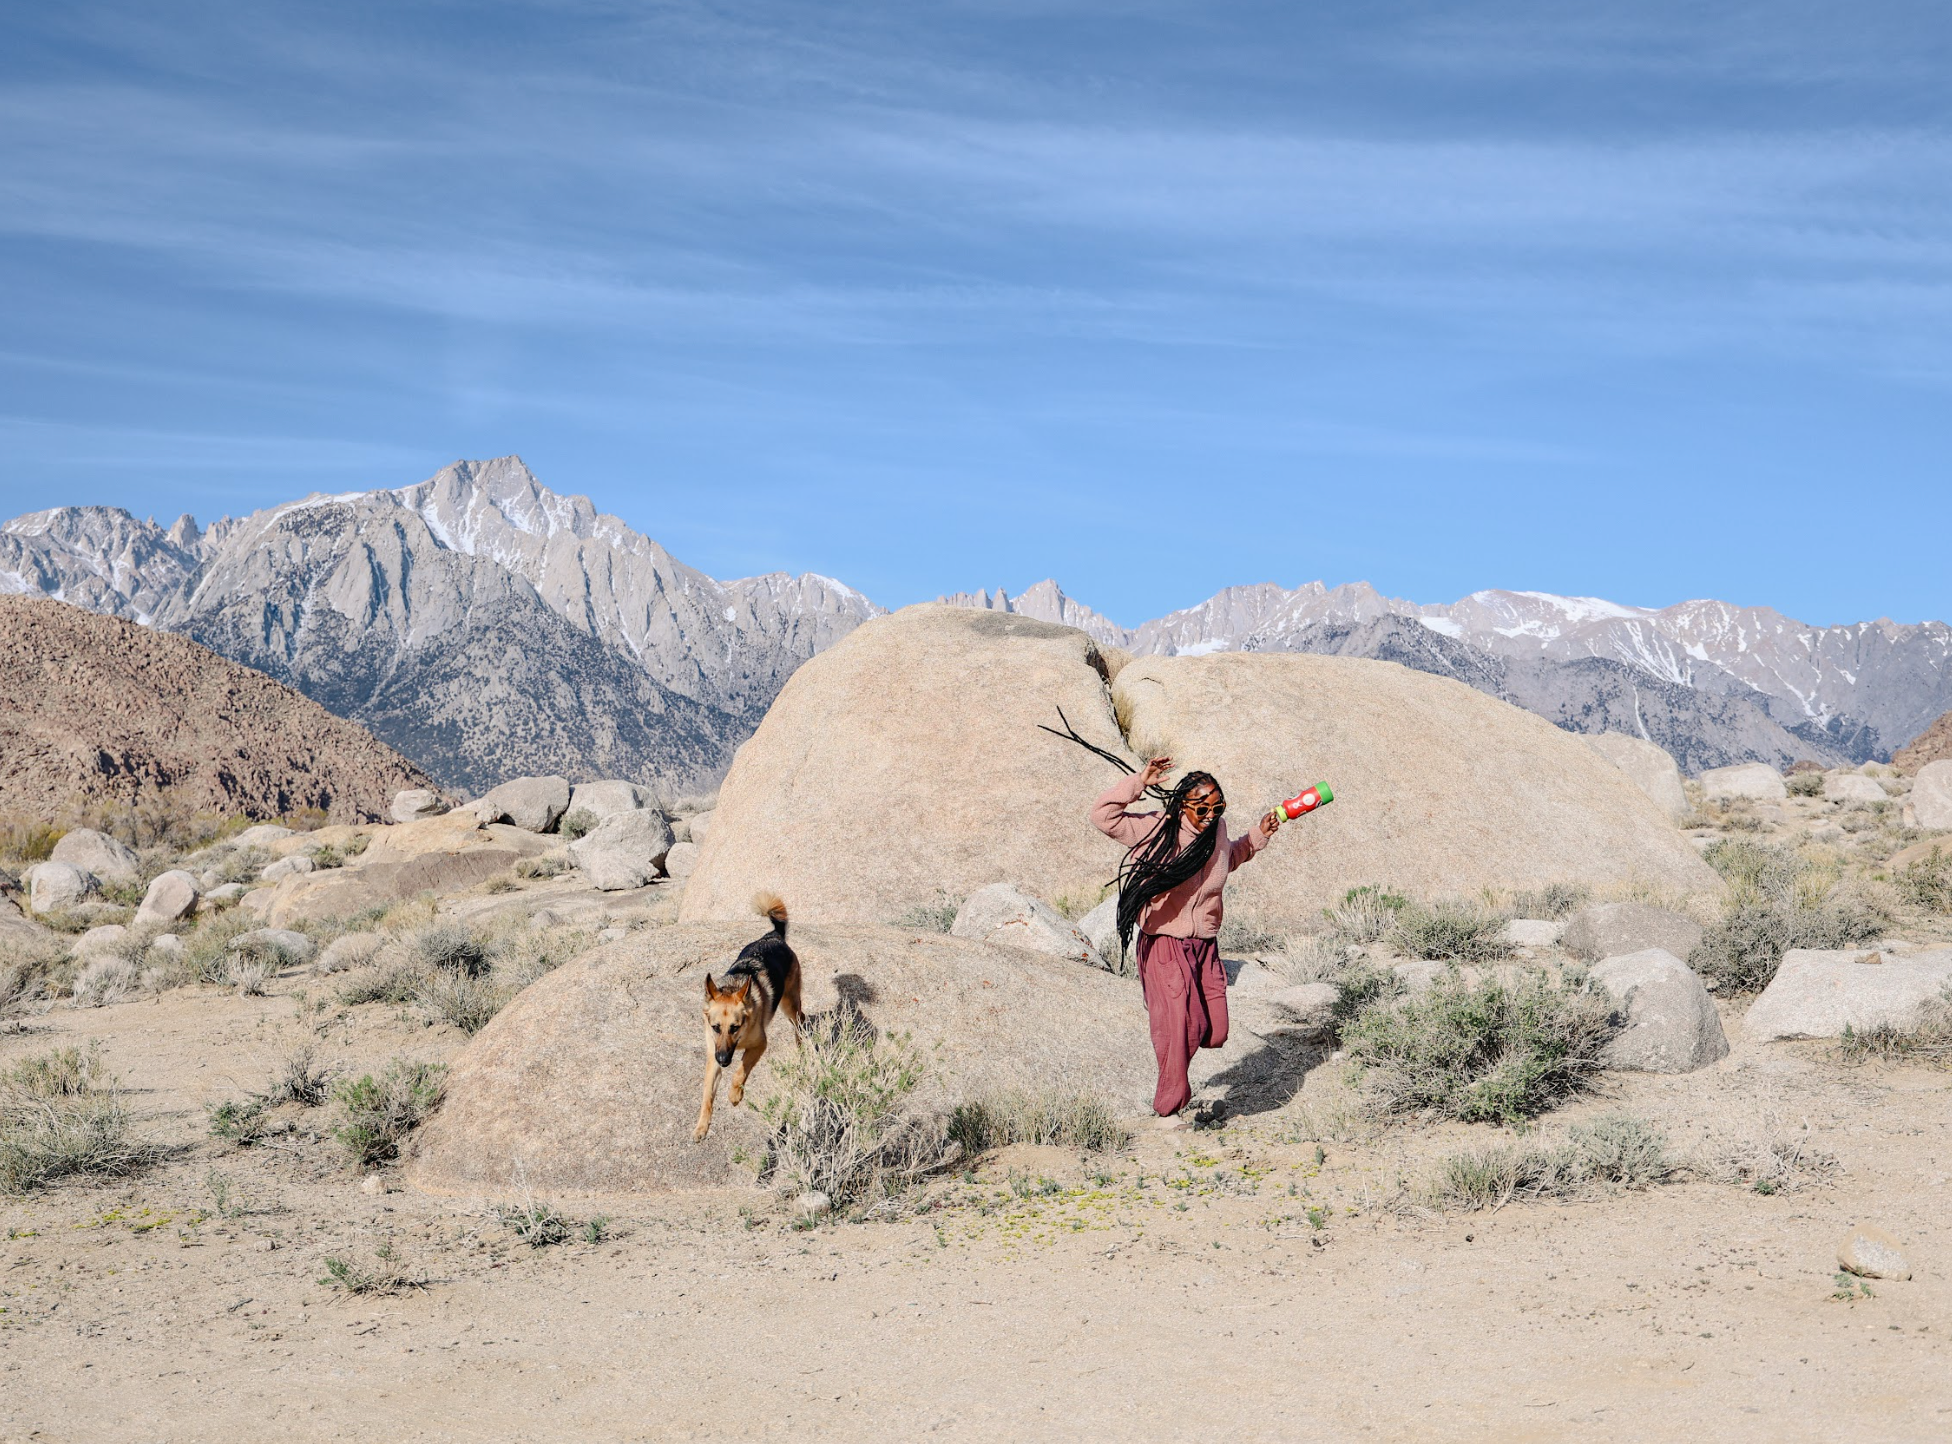 Woman and dog jump and play in a rocky desert.